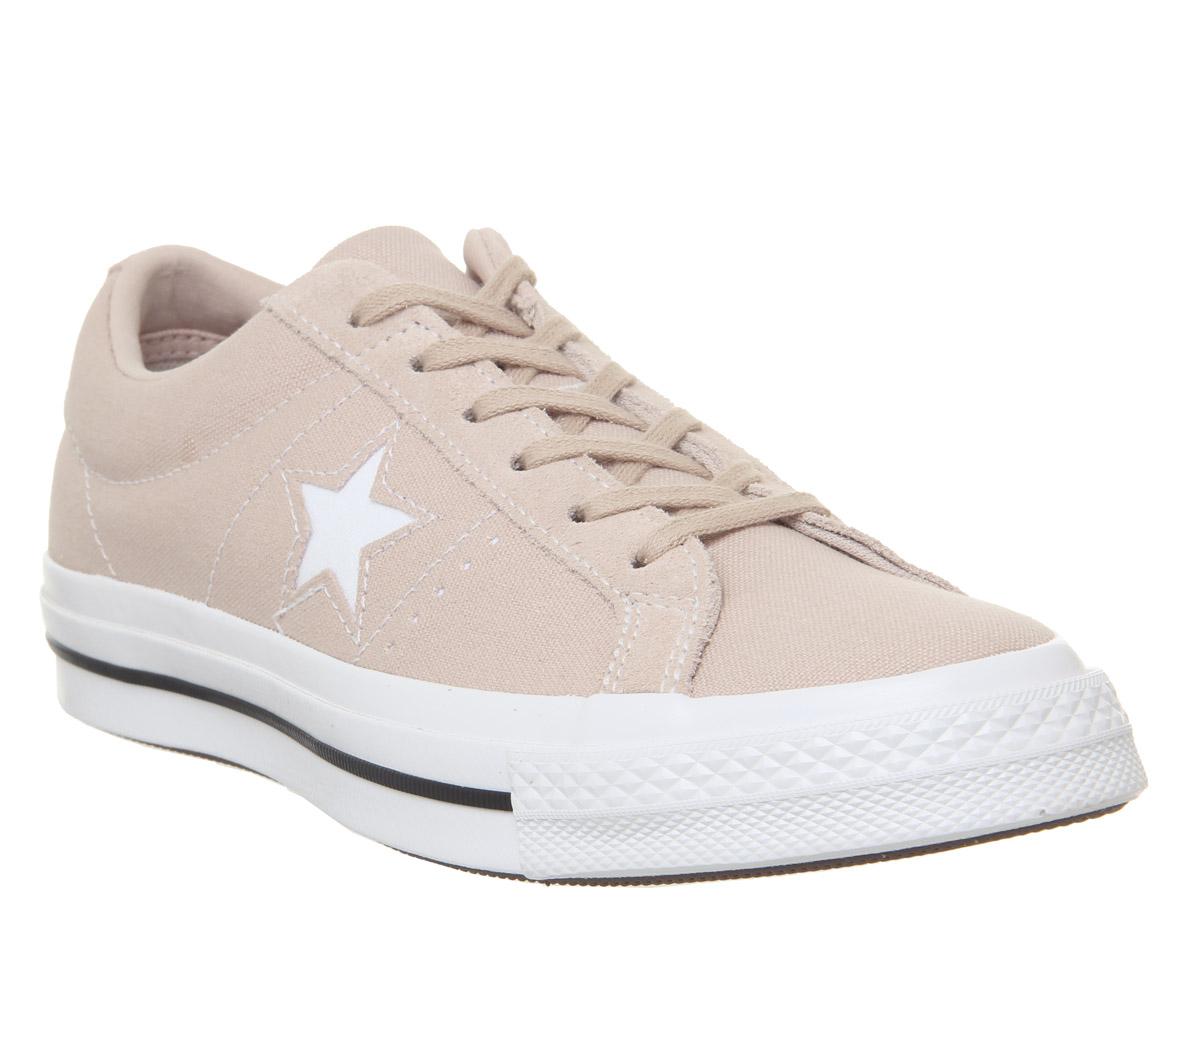 ConverseOne Star TrainersParticle Beige White Black